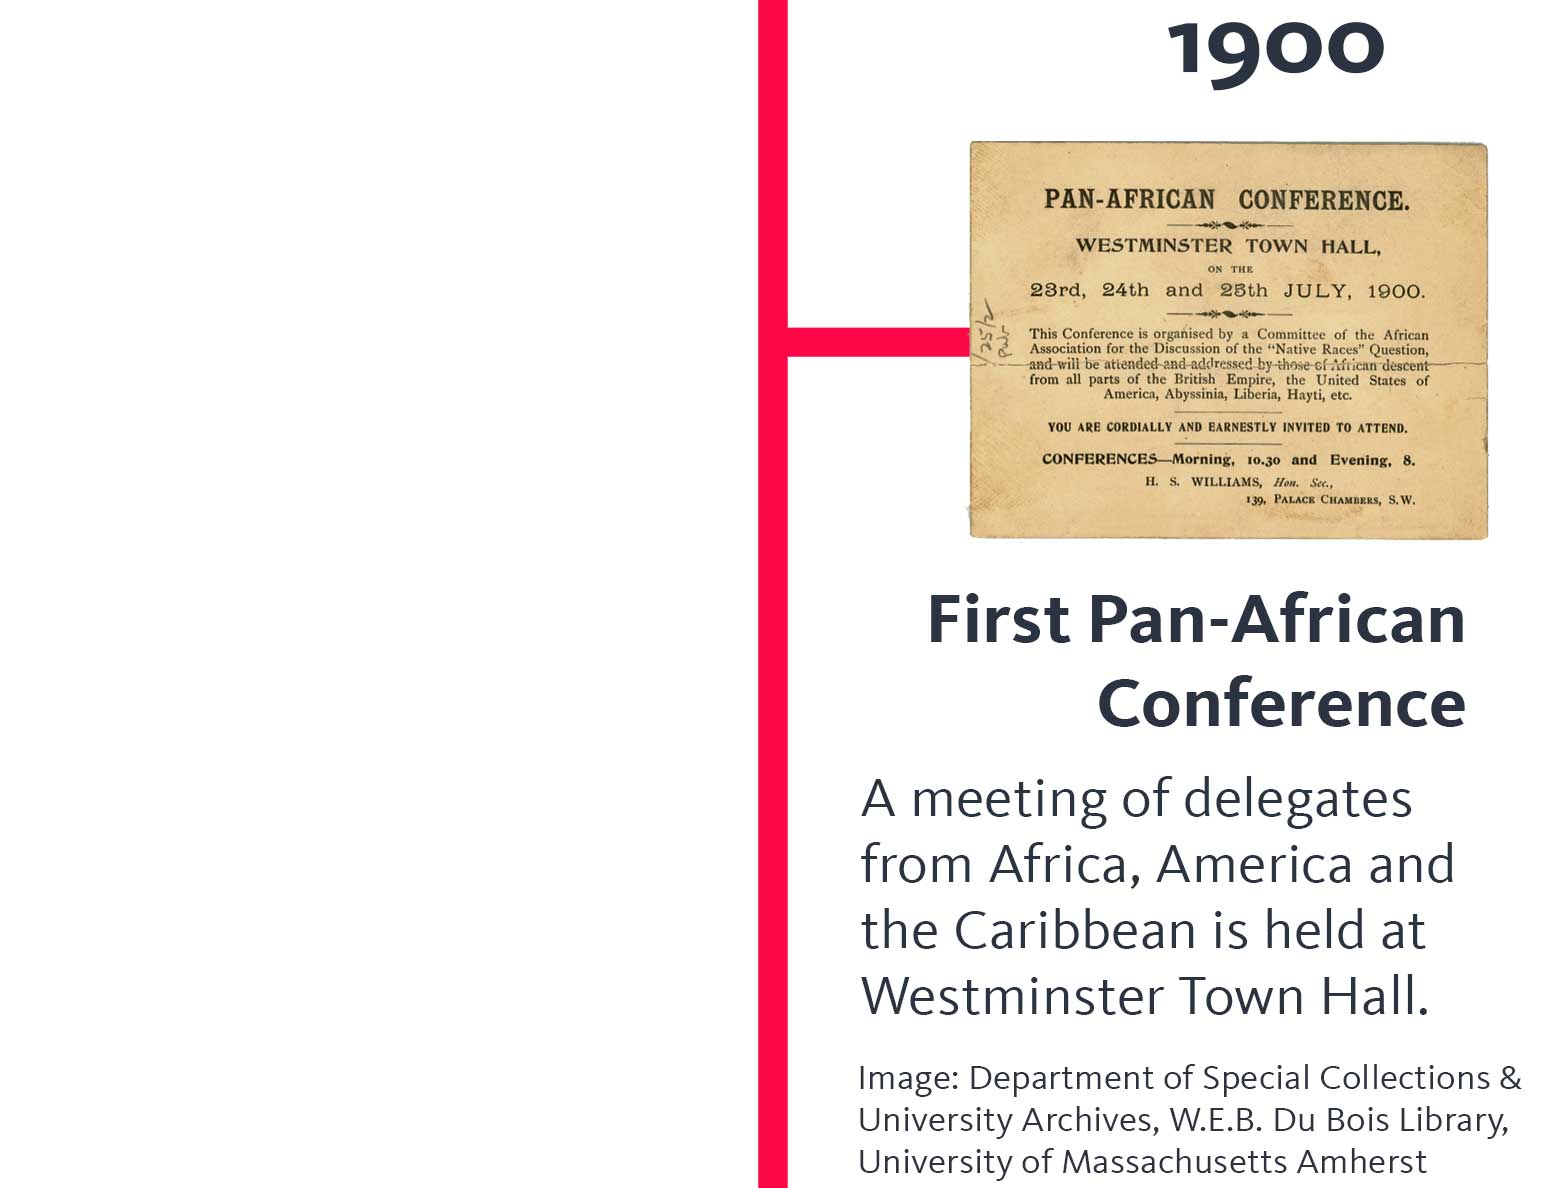 The year '1900' appears above an image of a paper invitation. A heading below says ' First Pan-African Conference', and text below that says 'A meetings of delegates from Africa, America and the Caribbean is held at Westminster Town Hall.' and below that, 'Image: Department of Special Collections & University Archives, W.E.B. Du Bois Library, University of Massachusetts Amherst'.